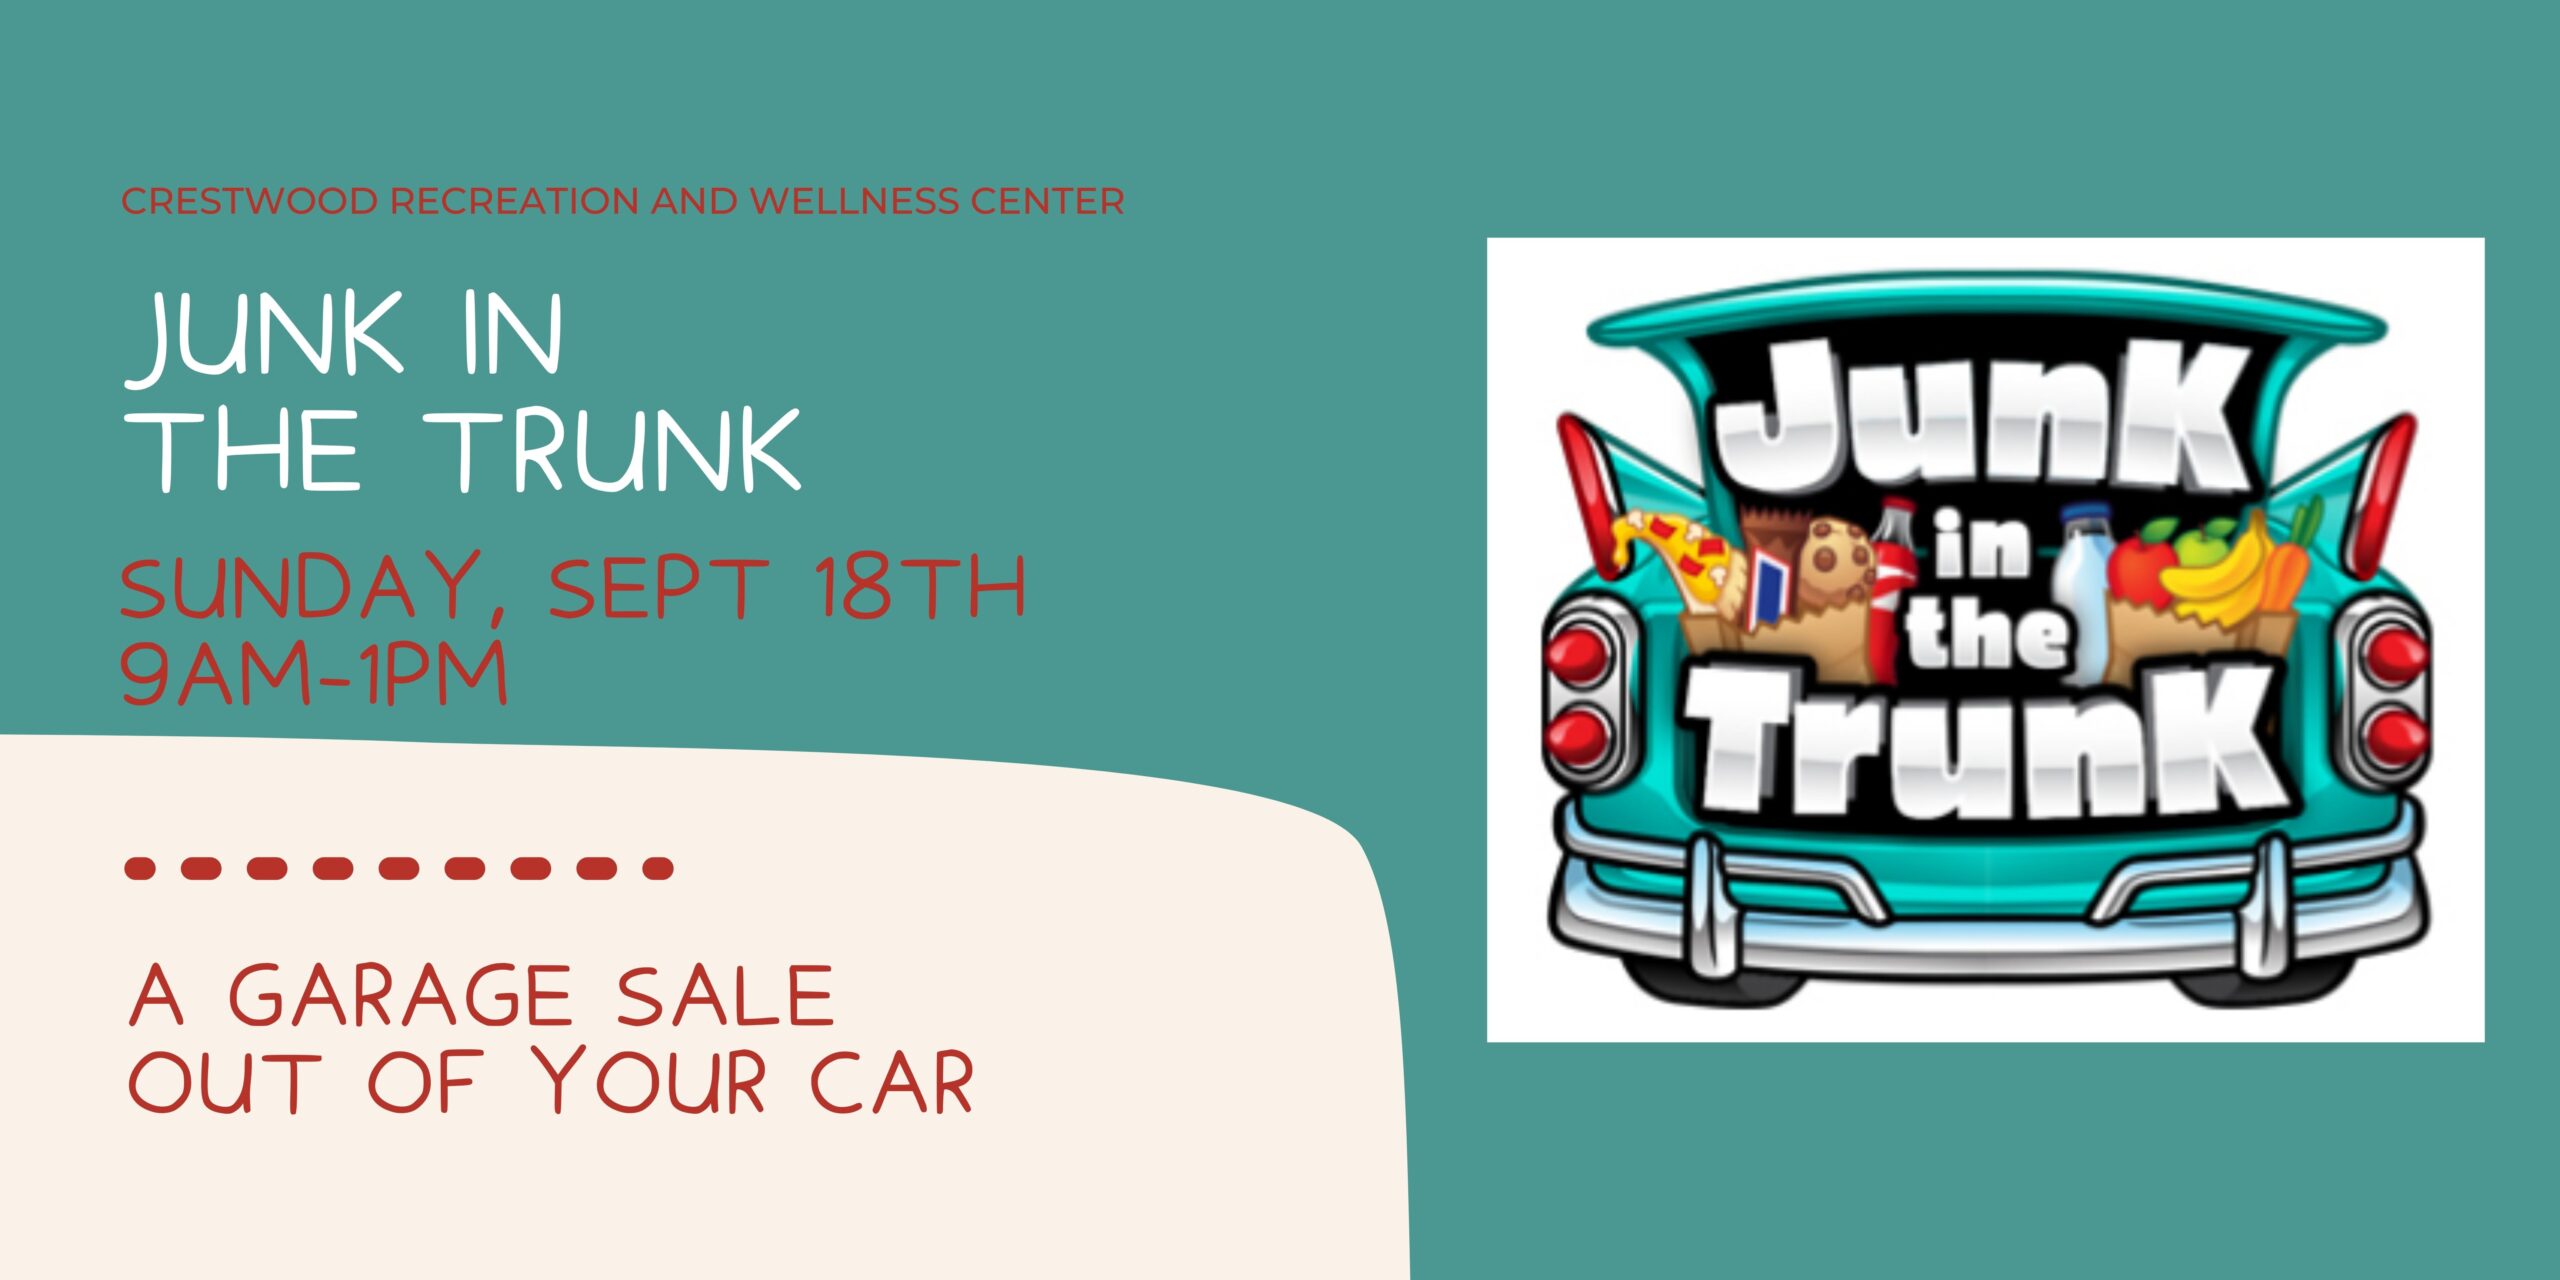 Junk In The Trunk Crestwood Recreation And Wellness Center 7997